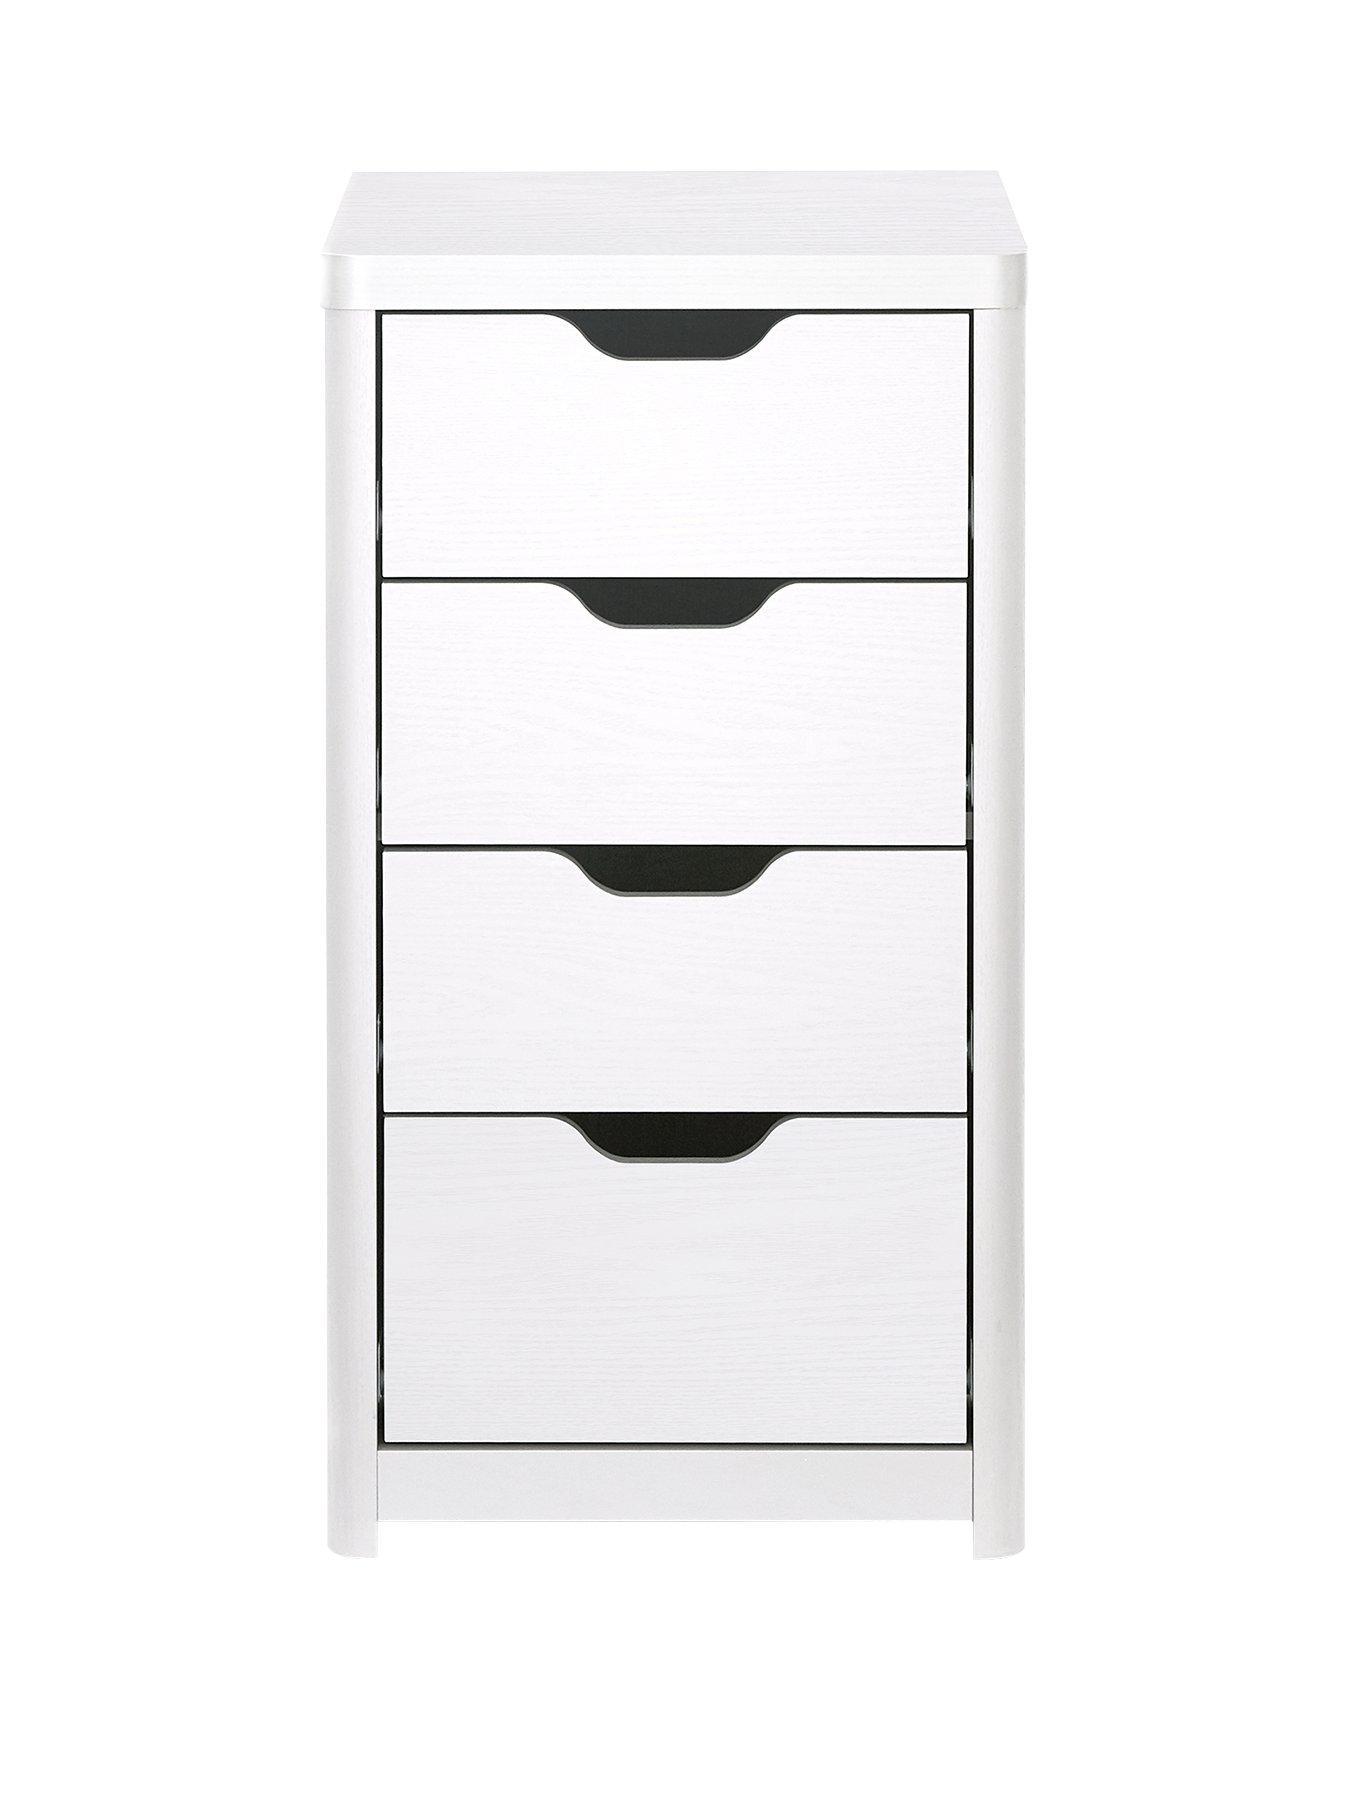 childrens white chest of drawers